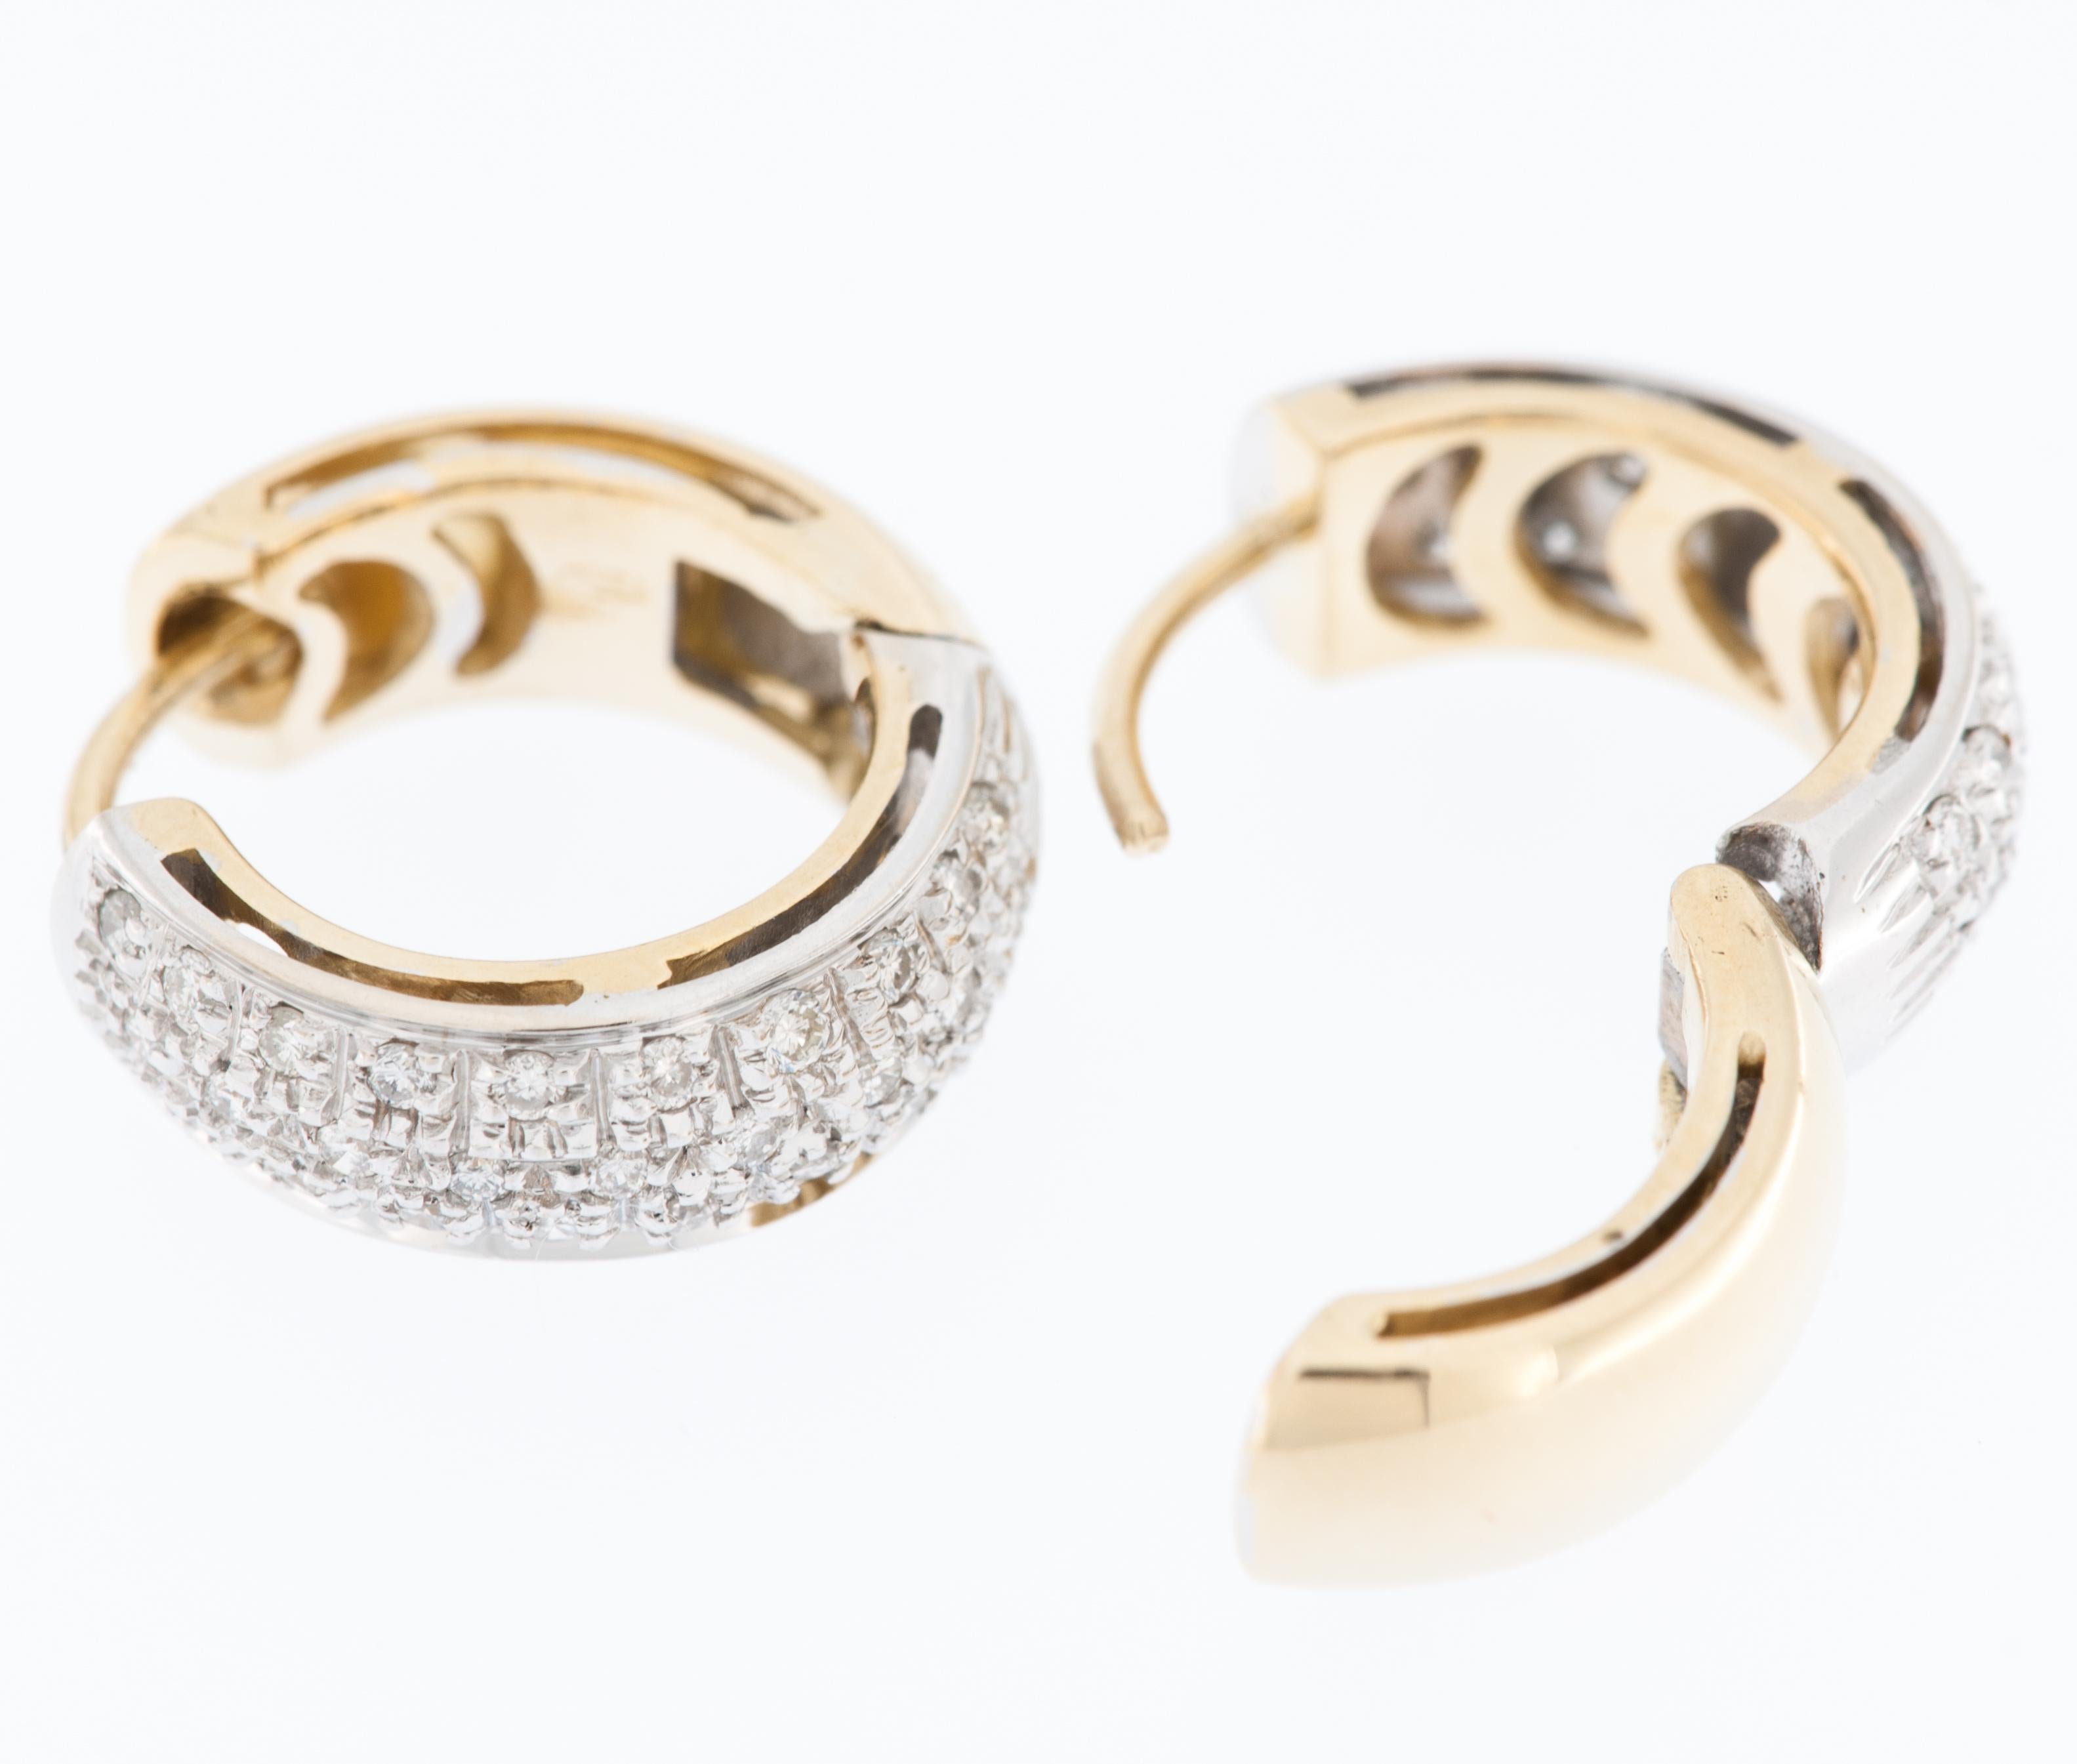 The Modern Italian 18kt Gold Hoop Earrings described are a sophisticated and elegant piece of jewelry, blending classic hoop design with luxurious materials and intricate details. 

Crafted from 18-karat gold, these earrings boast a high level of